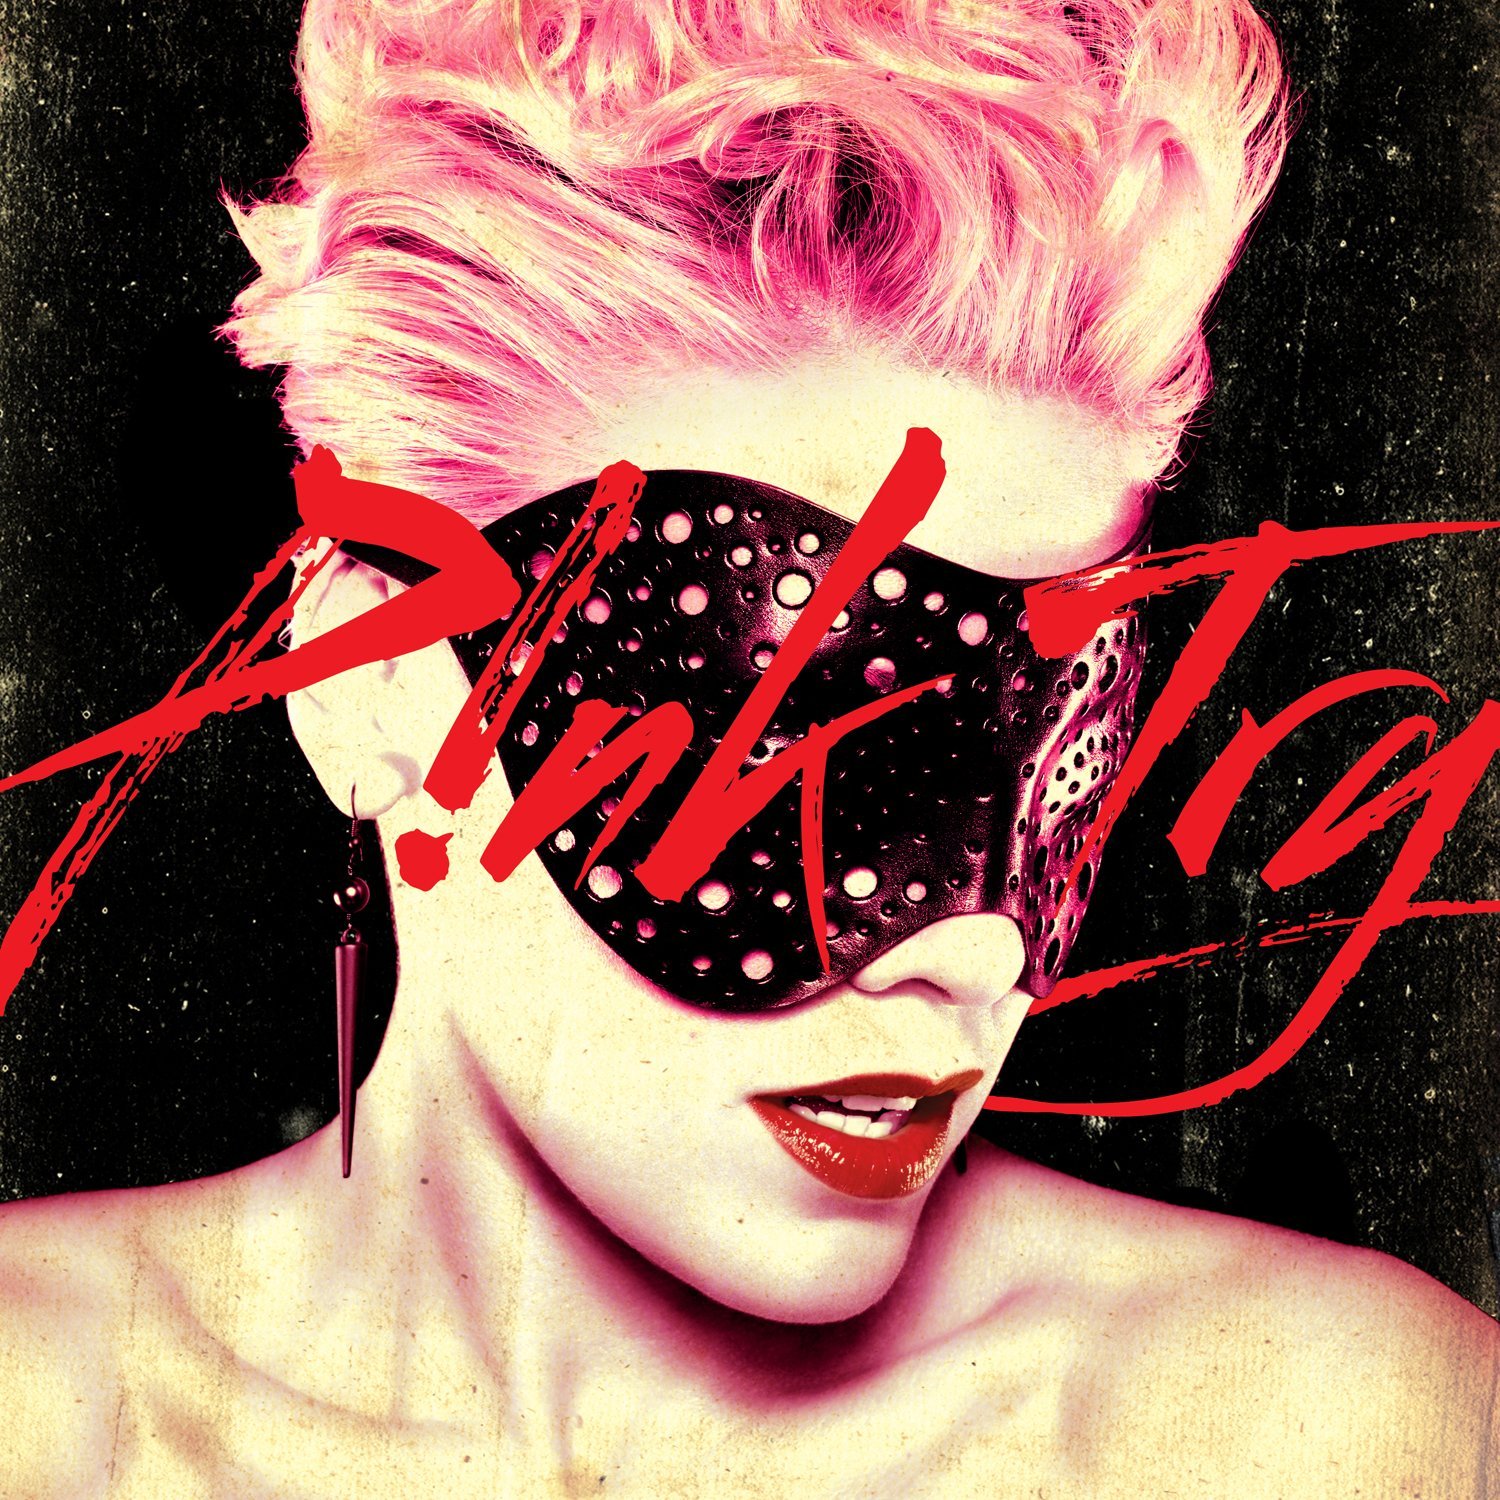 P Nk Funhouse Deluxe Edition Torrent